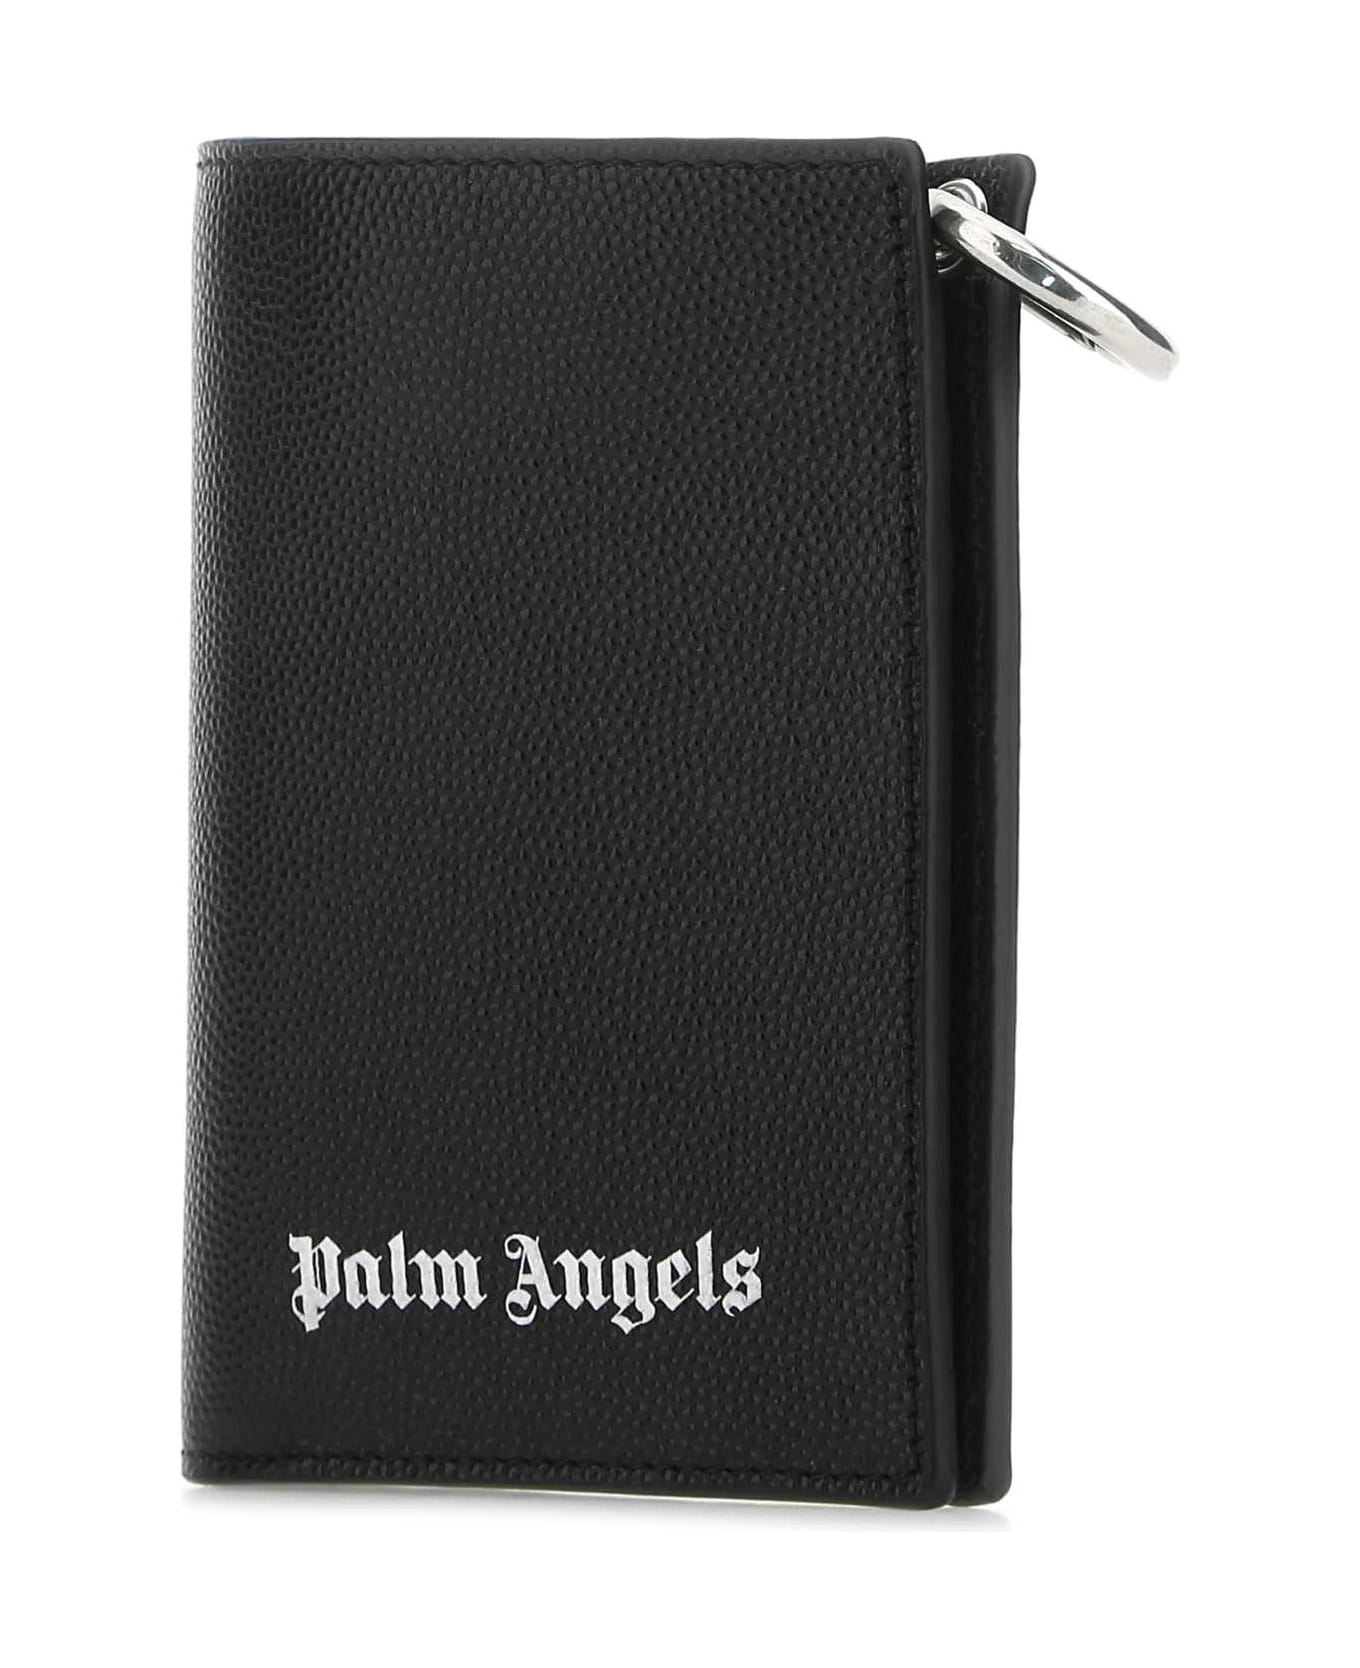 Palm Angels Black Leather Wallet - 1001